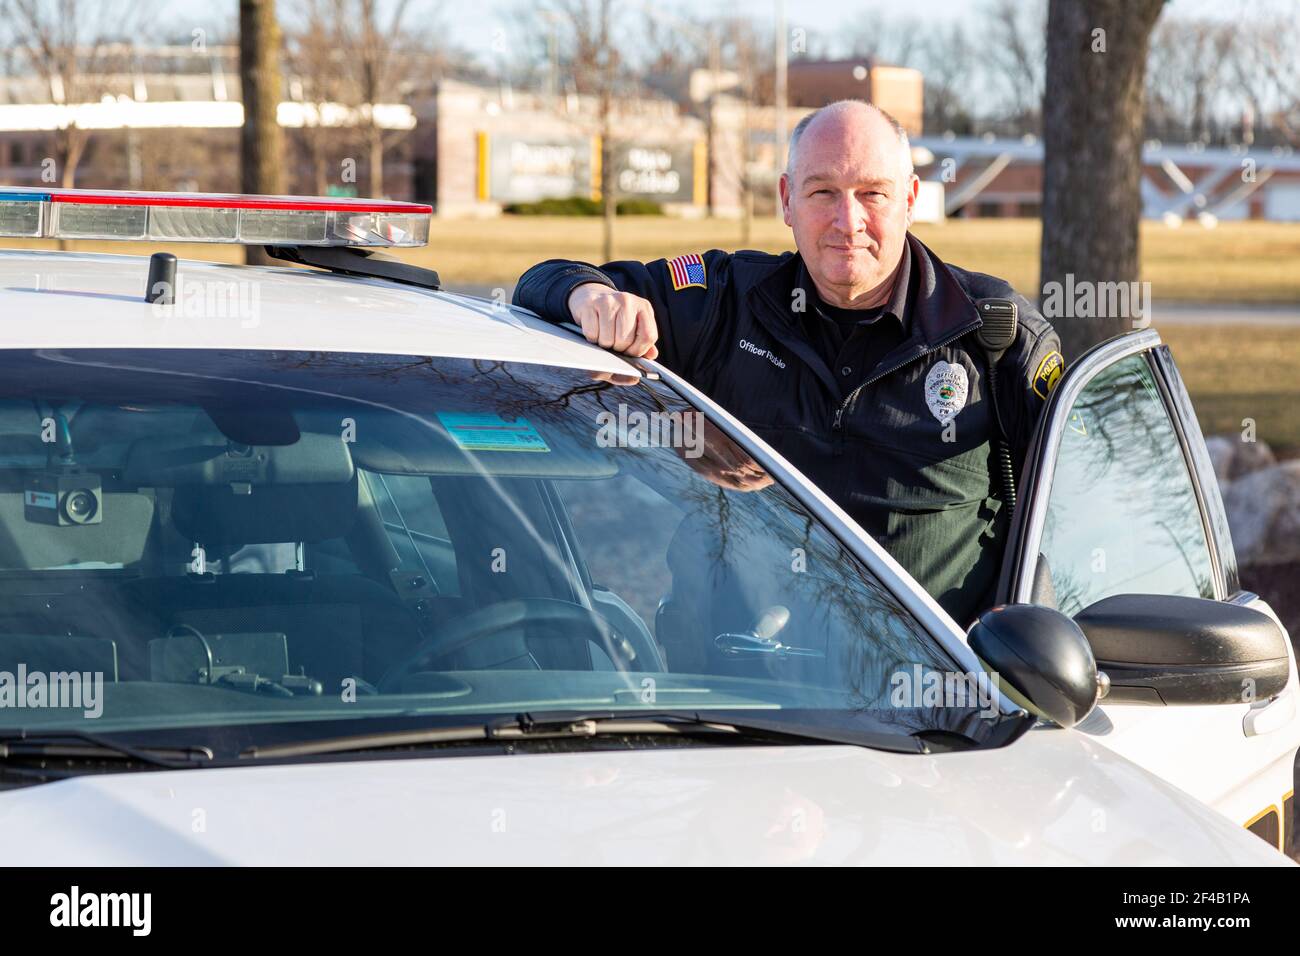 A Purdue University Fort Wayne police officer stands next to a patrol car on campus. Stock Photo